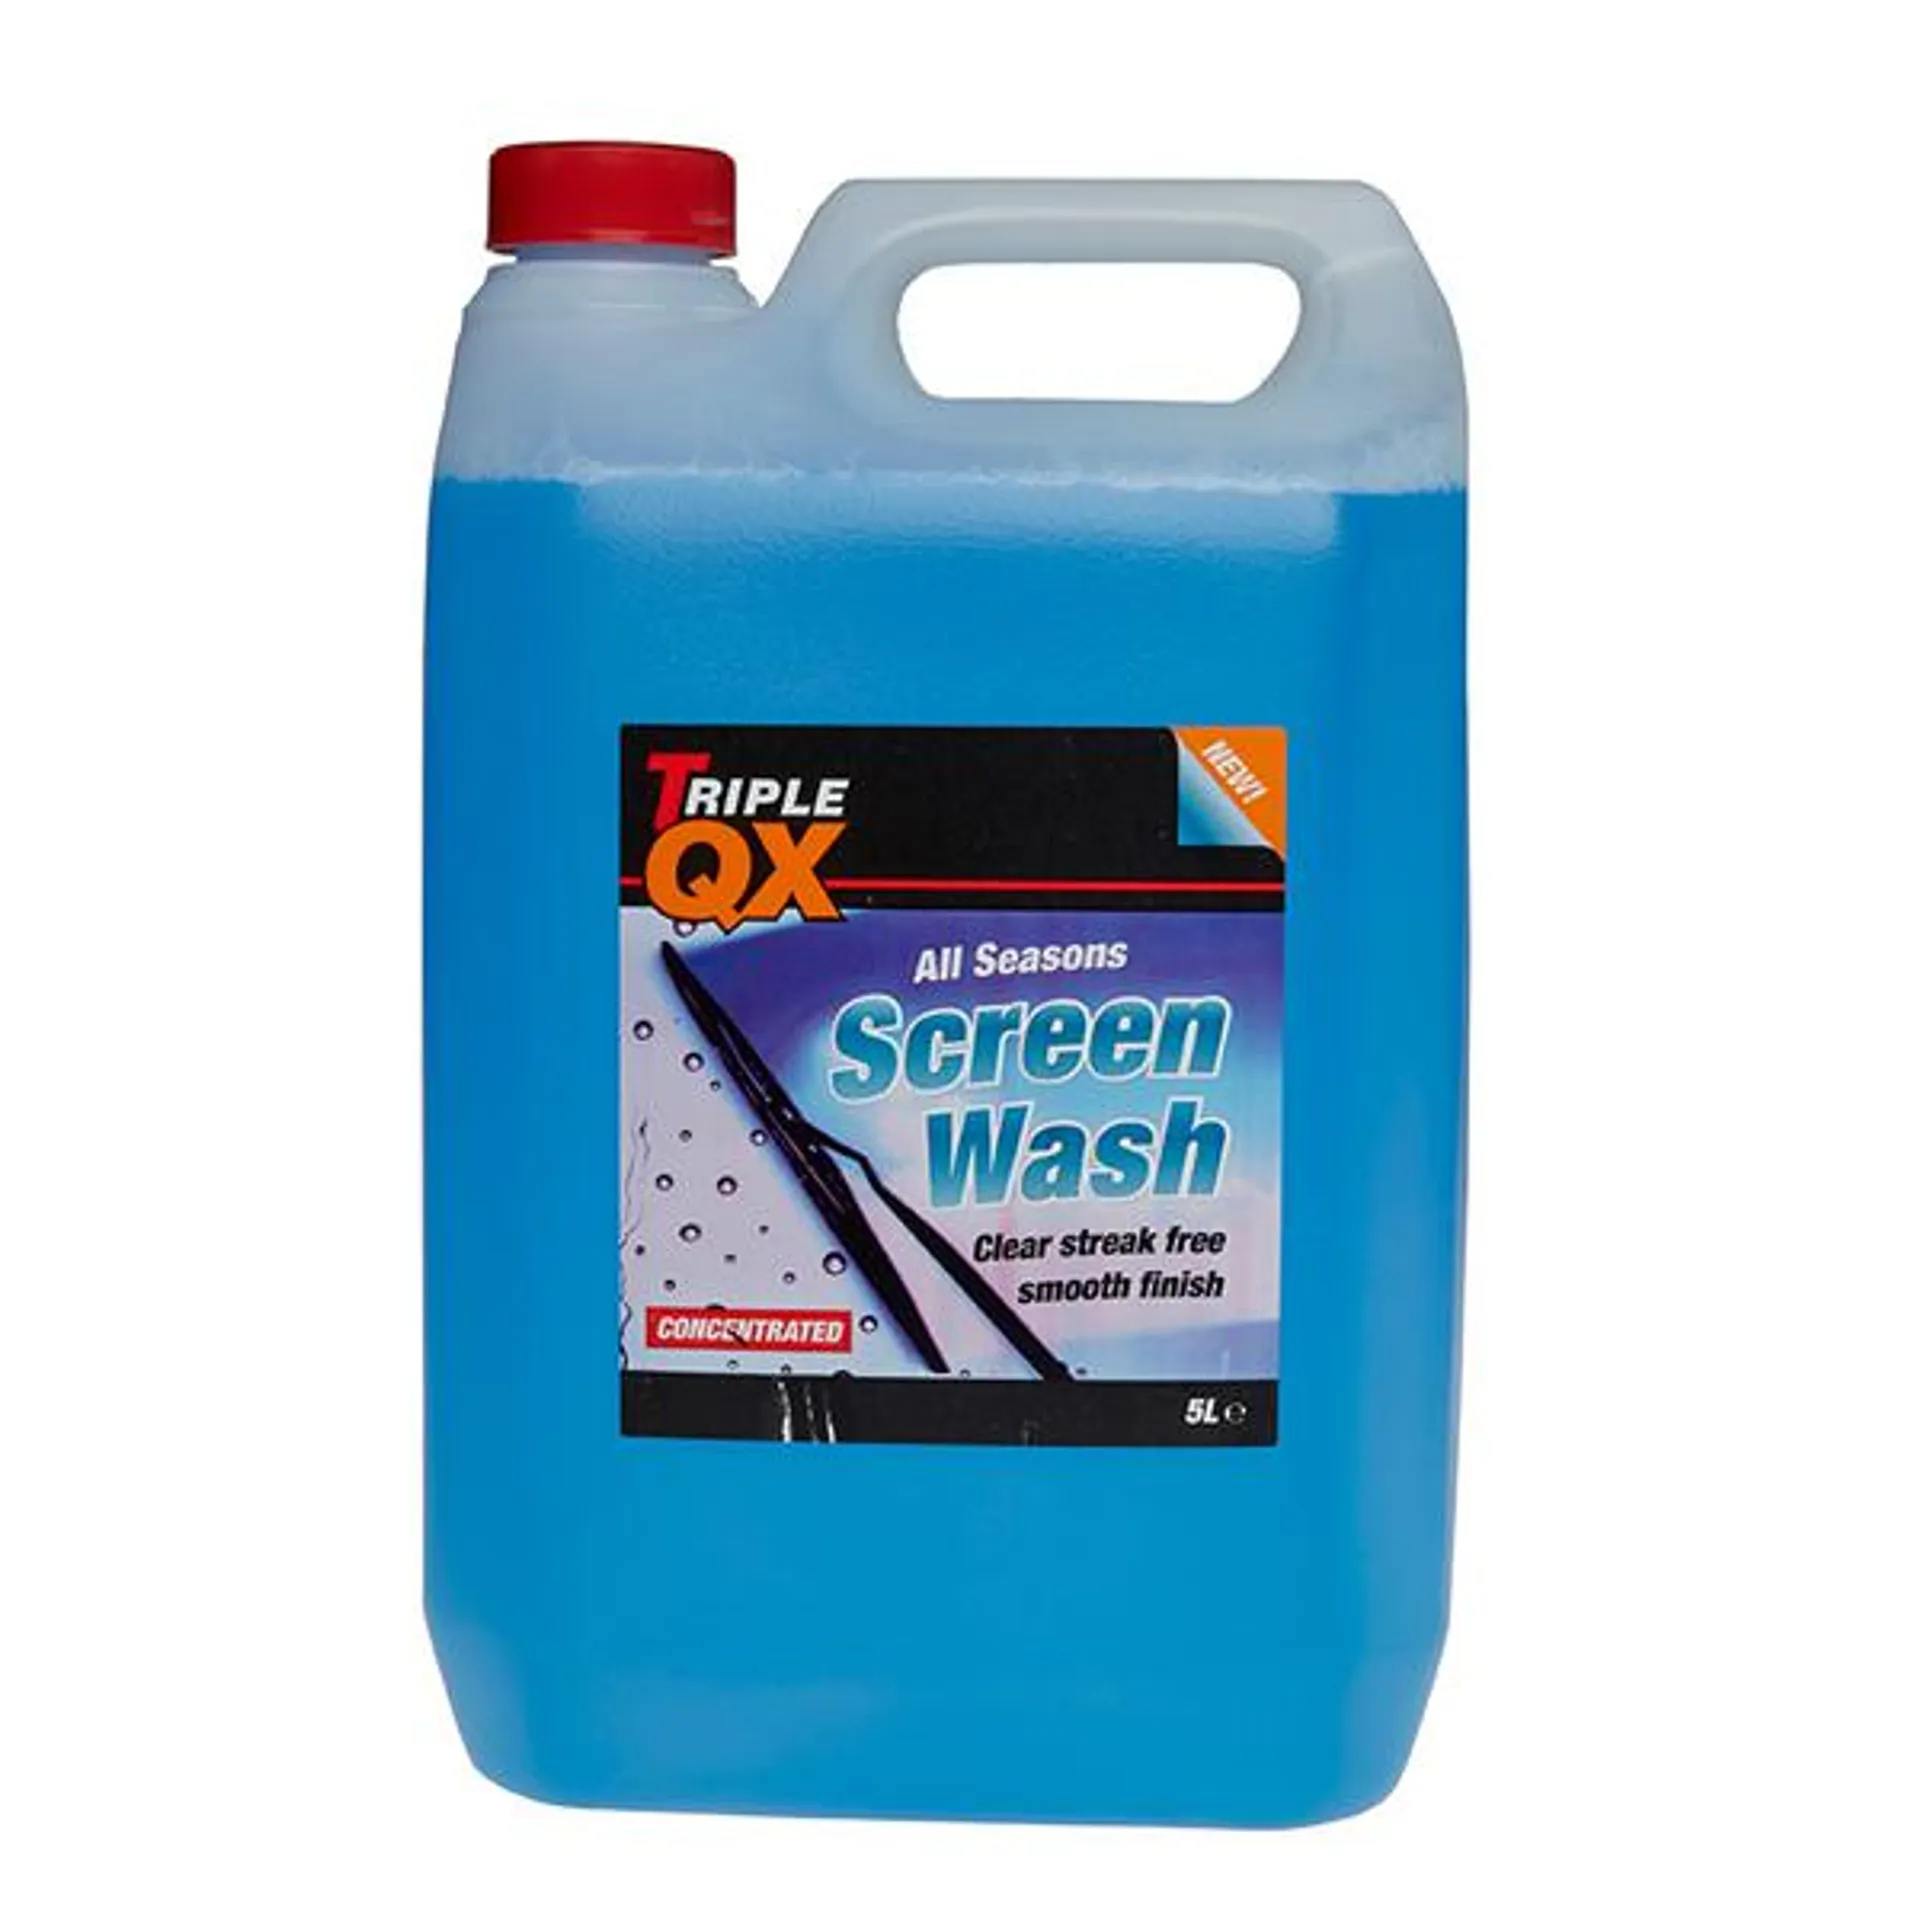 TRIPLE QX Concentrated Screenwash 5Ltrs